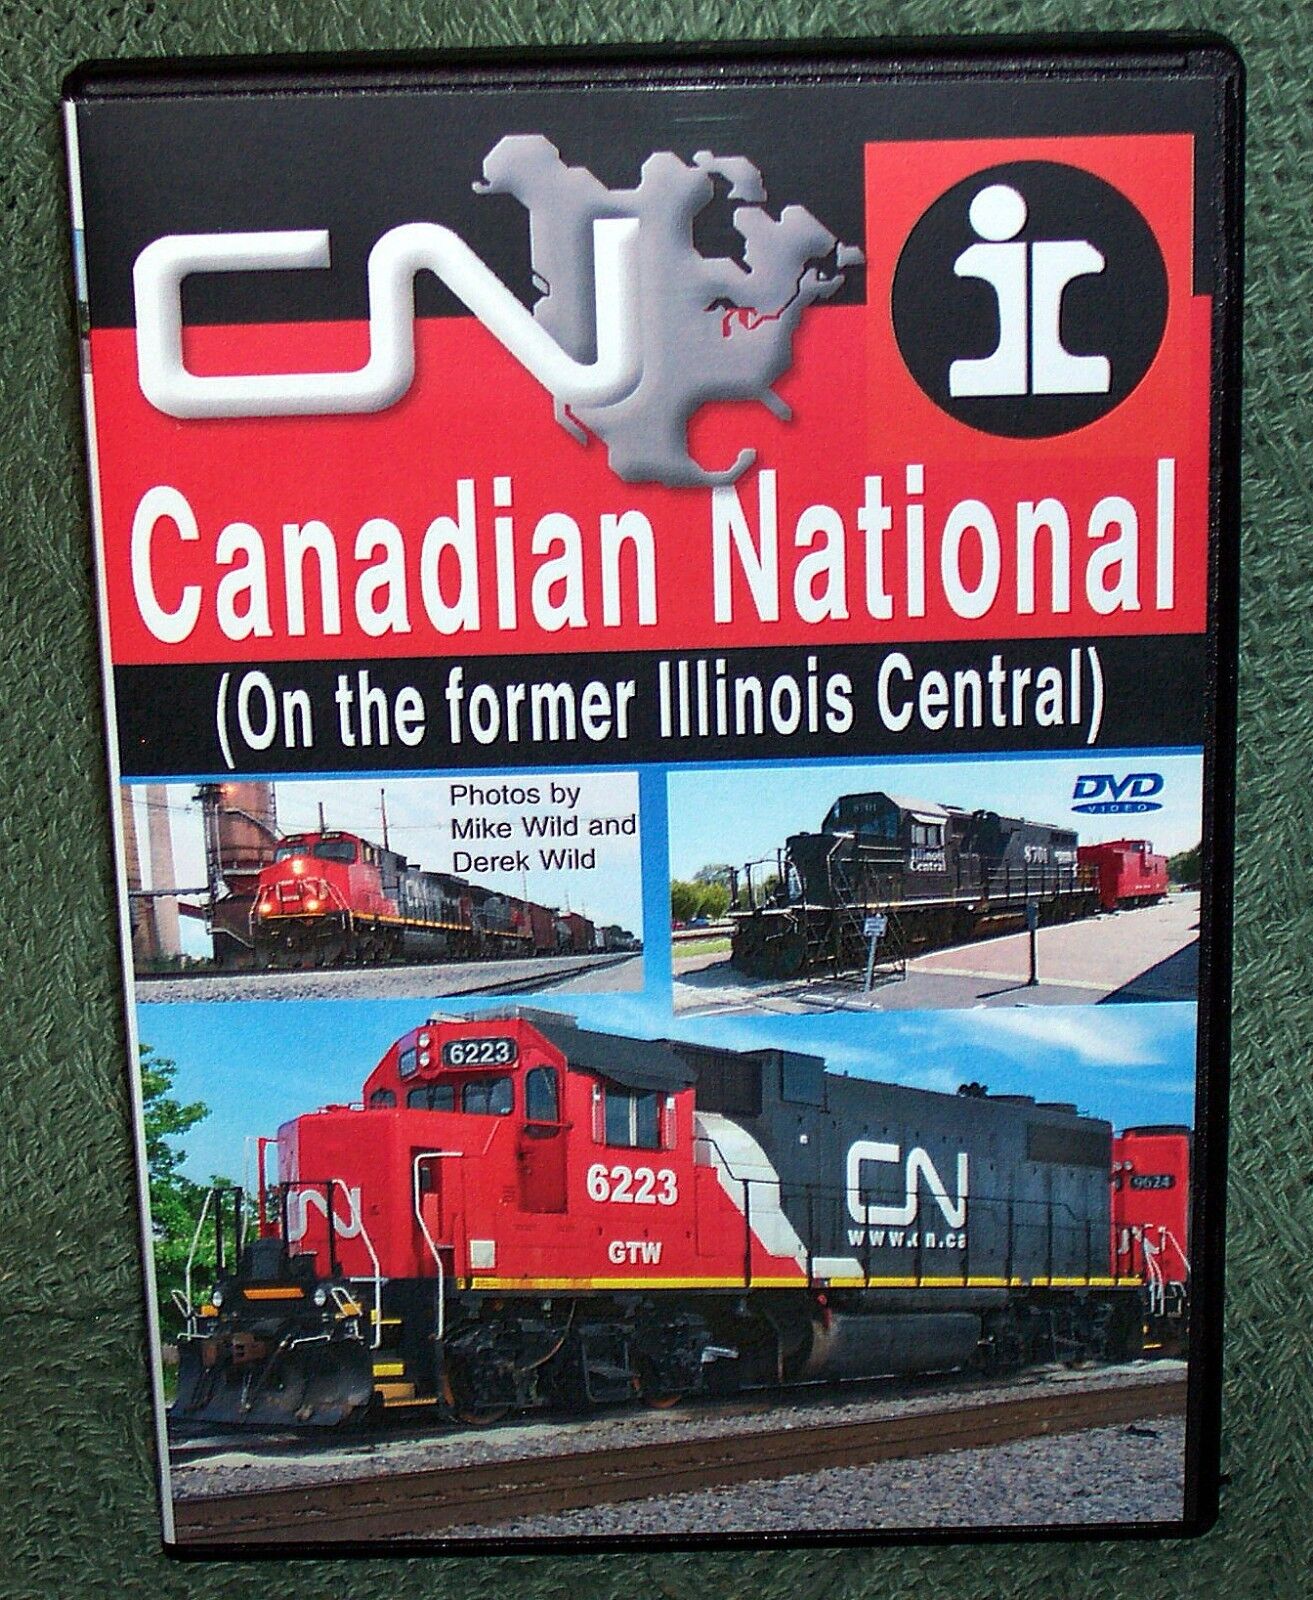 20385 TRAIN VIDEO DVD CANADIAN NATIONAL CN ON FORMER ILLINOIS CENTRAL